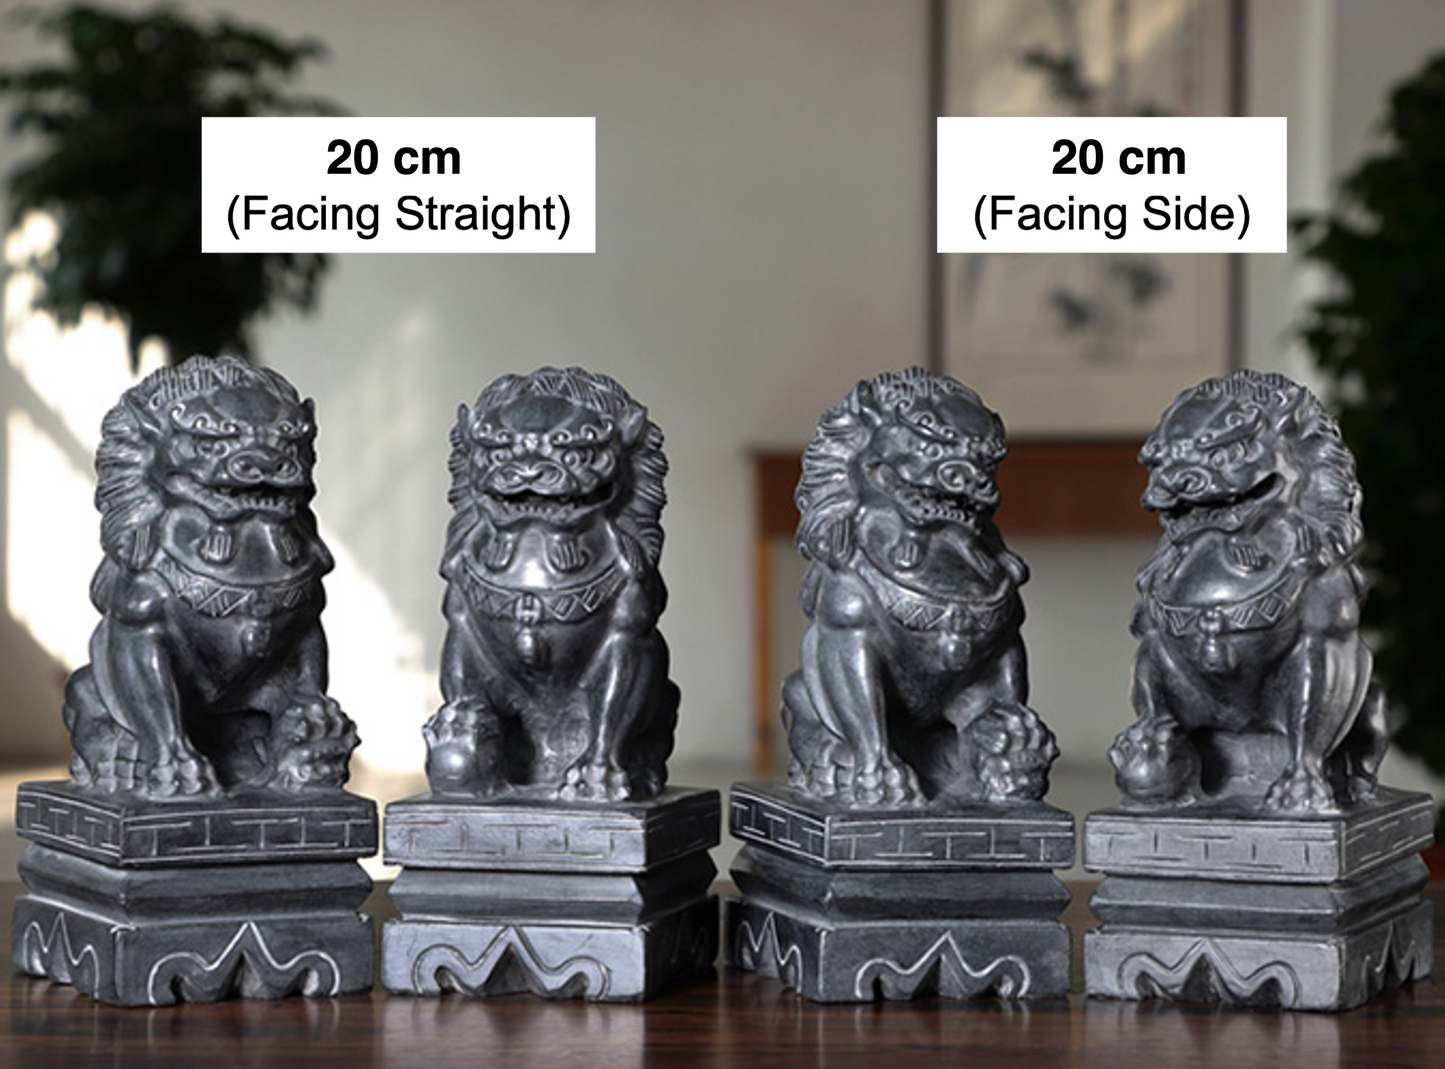 Auspicious Stone Foo Dogs Guardian Lion Sculpture & Statue | Fengshui | Home Decor | Office Blessing | Chinese architectural